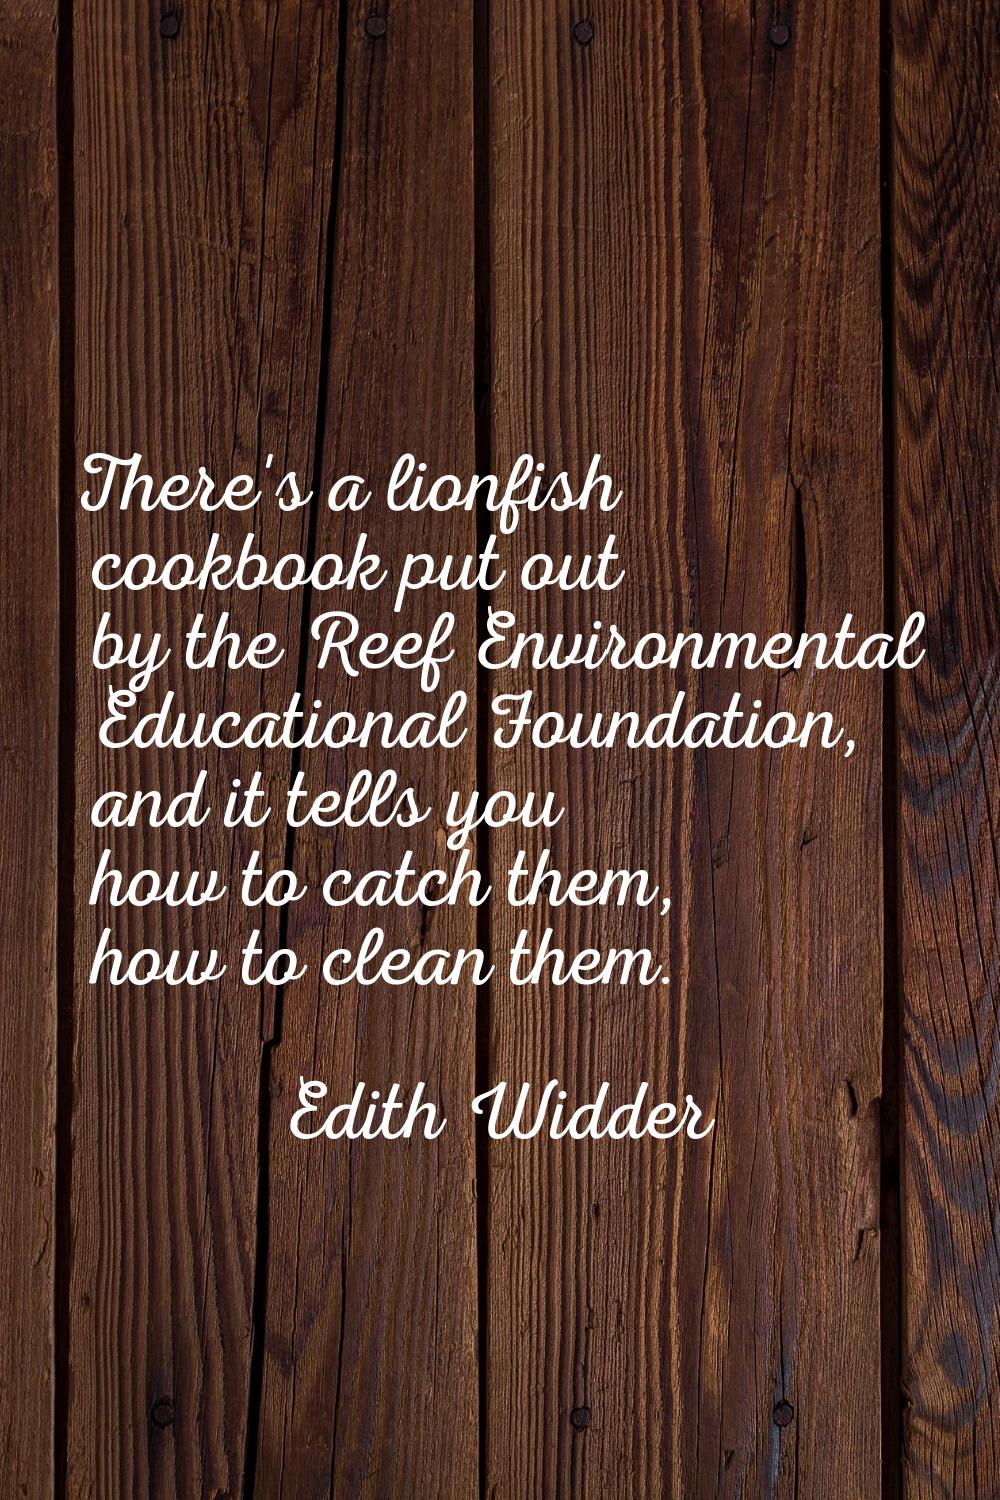 There's a lionfish cookbook put out by the Reef Environmental Educational Foundation, and it tells 